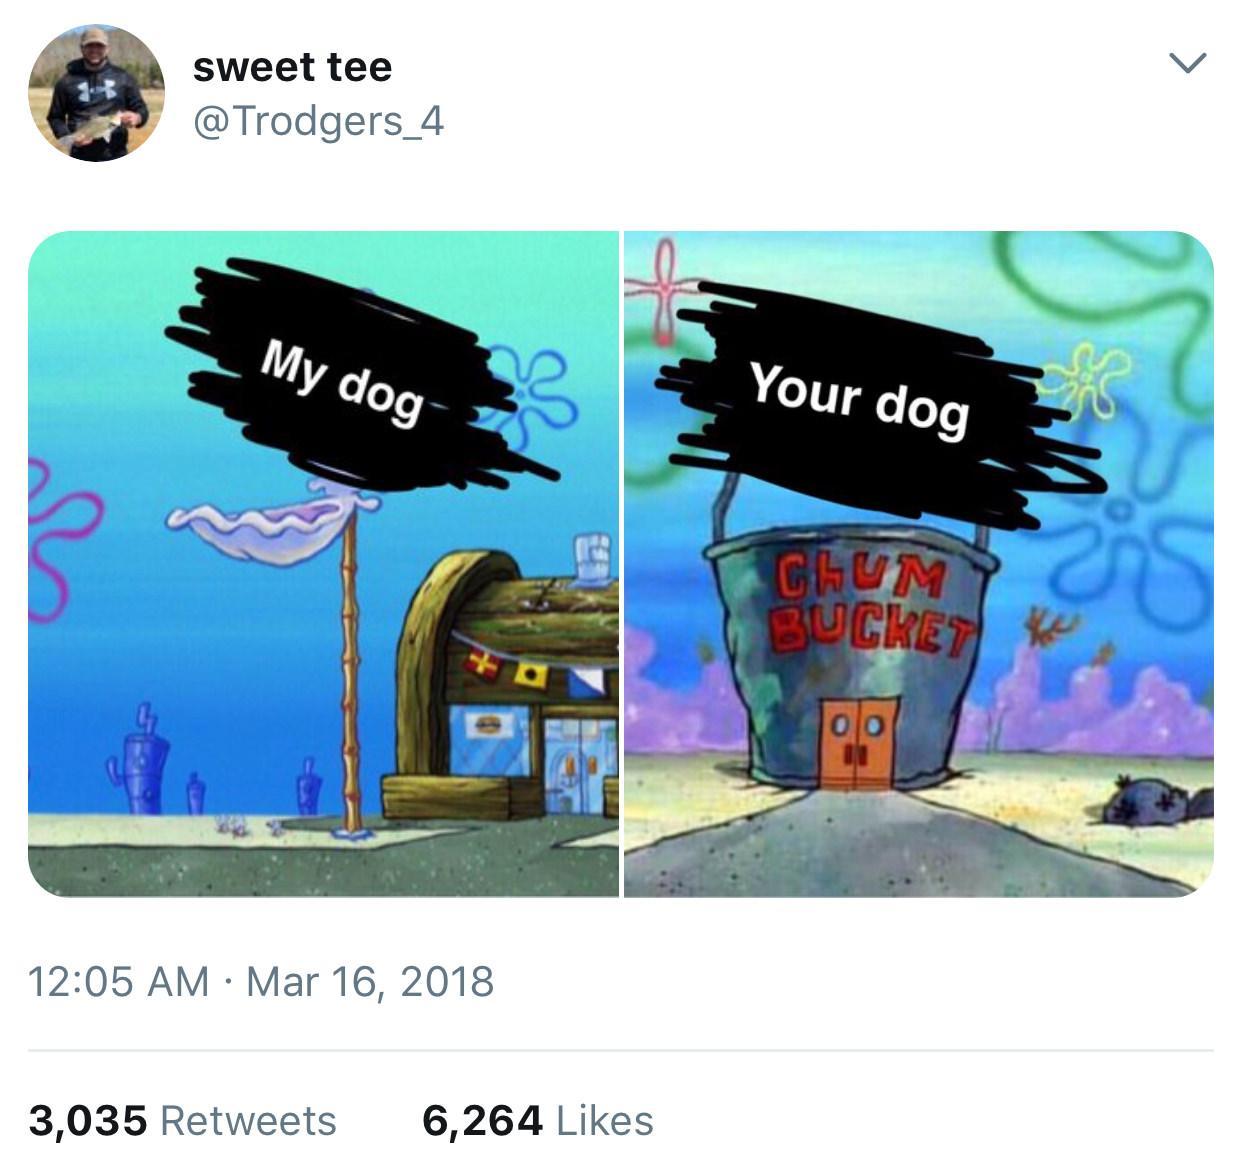 The competing restaurants in "SpongeBob Squarepants" are used in a rivalry-themed meme.